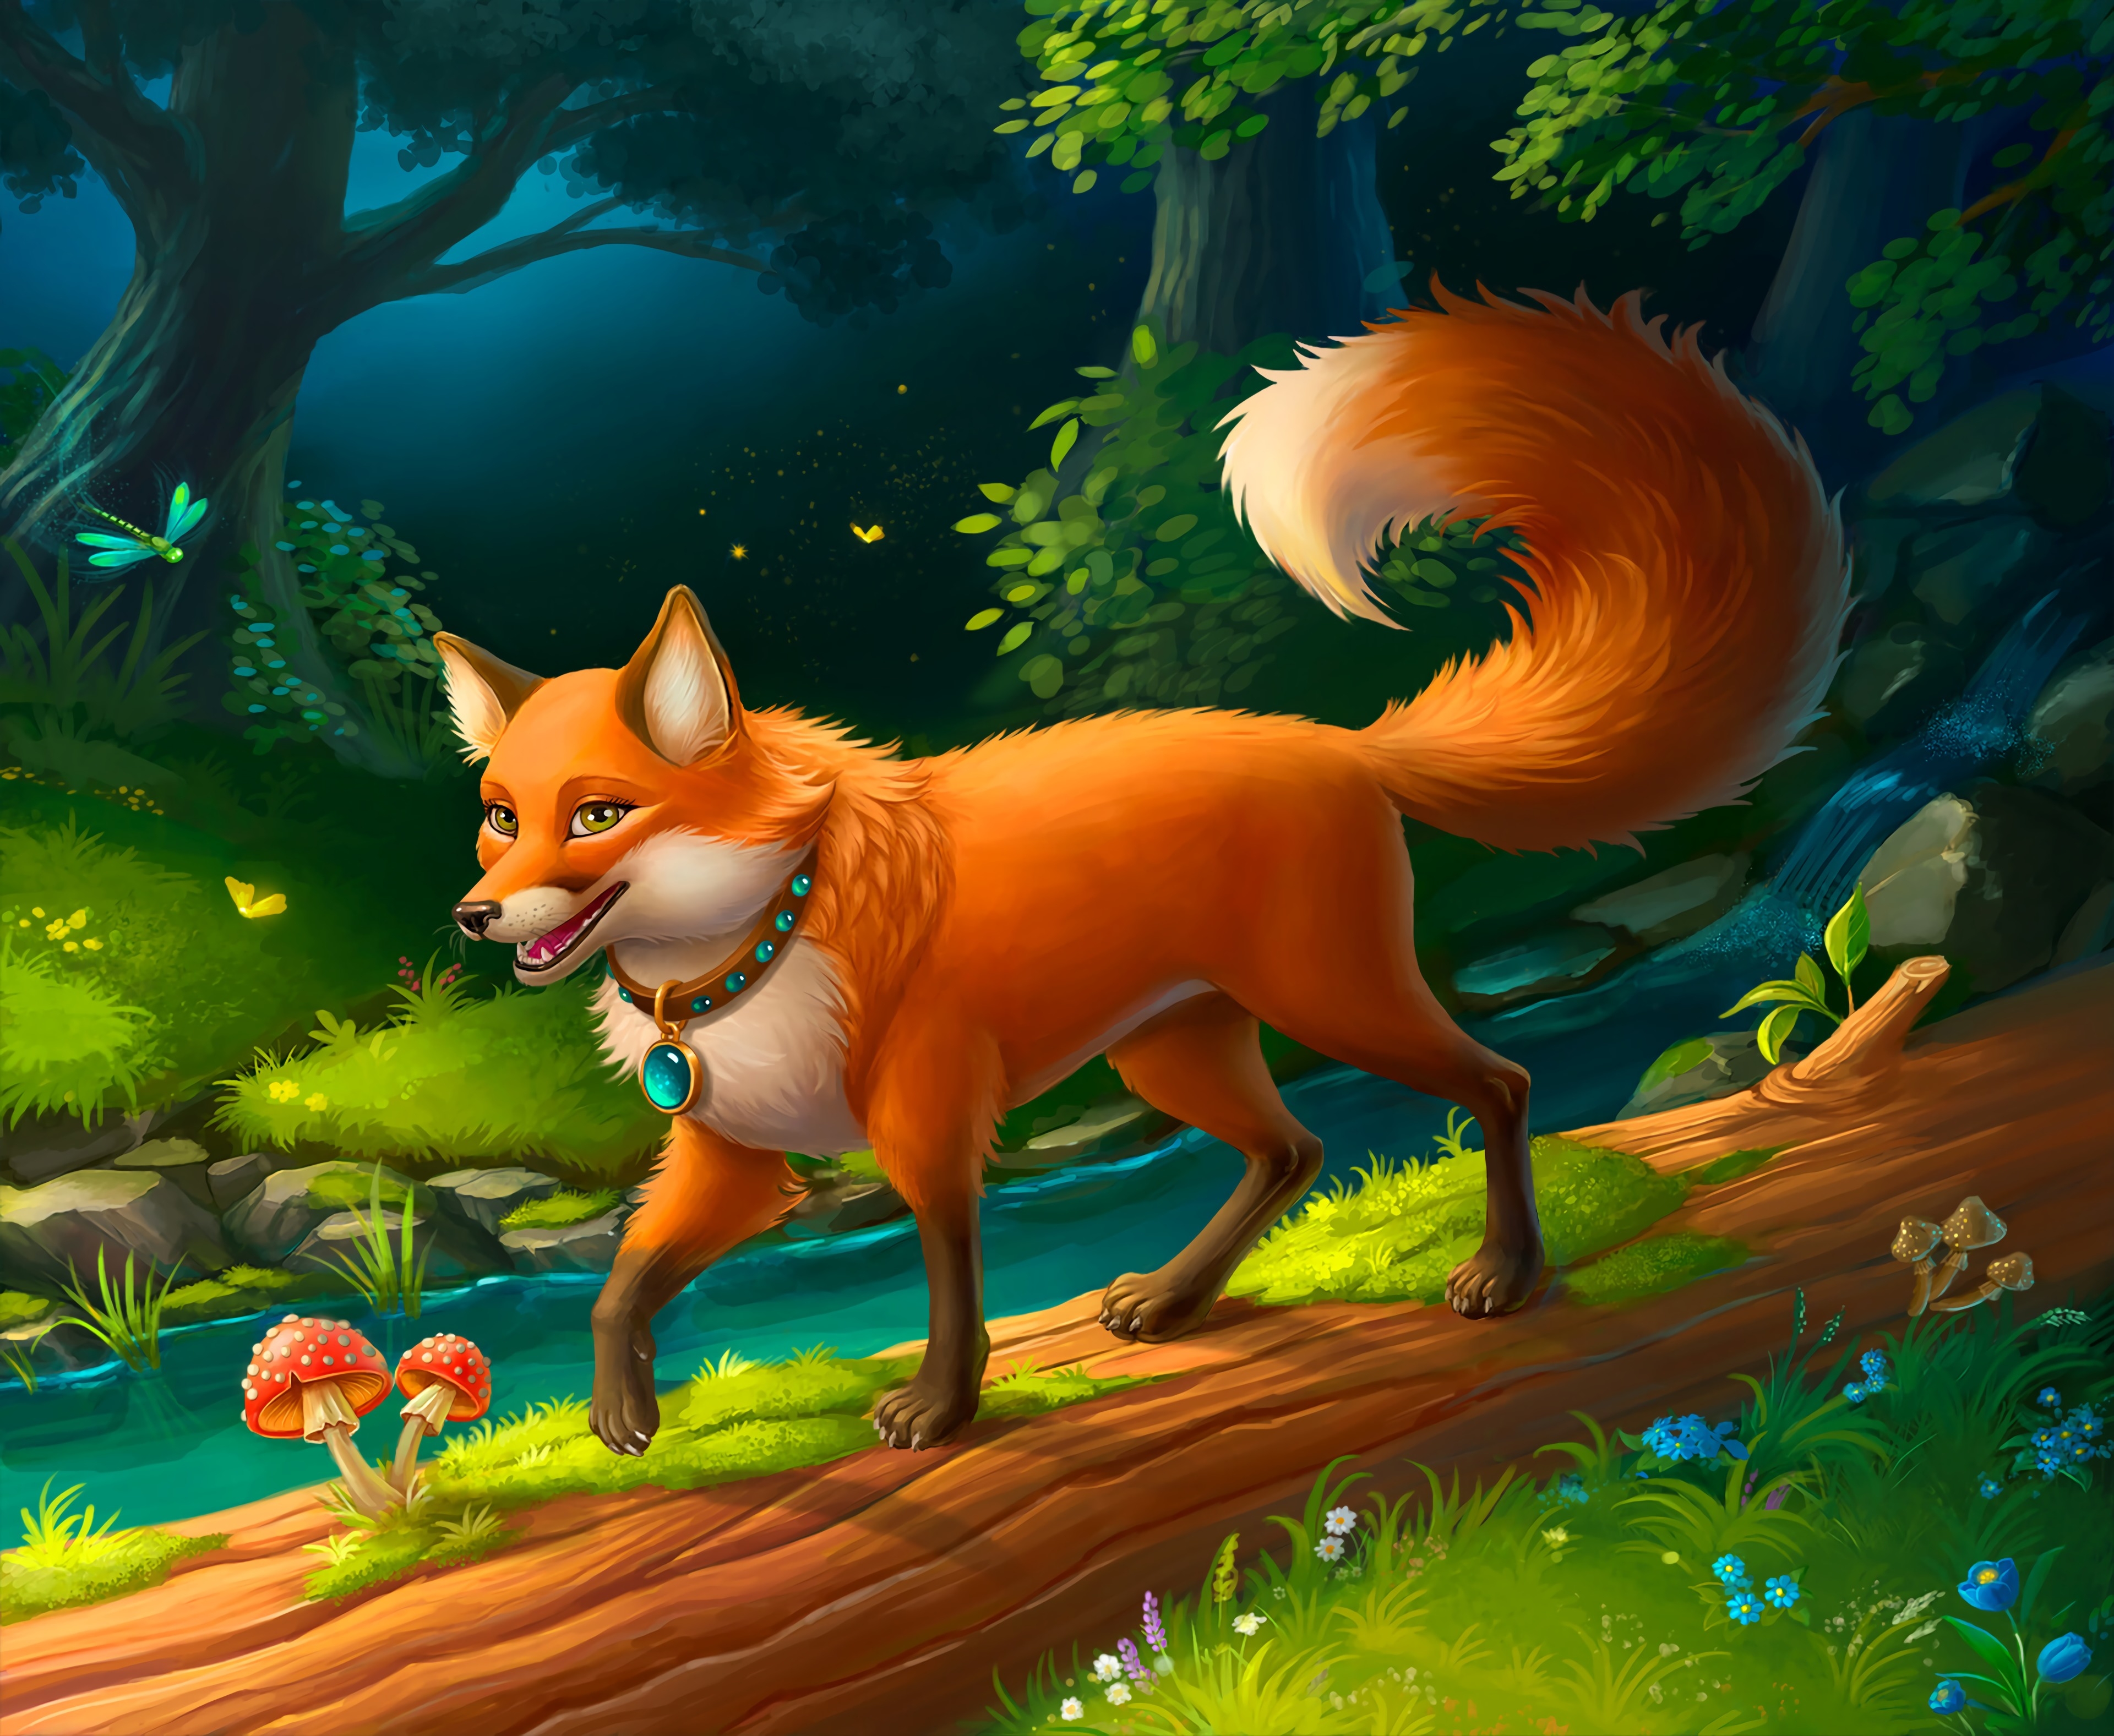 A fox with a pendant around his neck from a cartoon